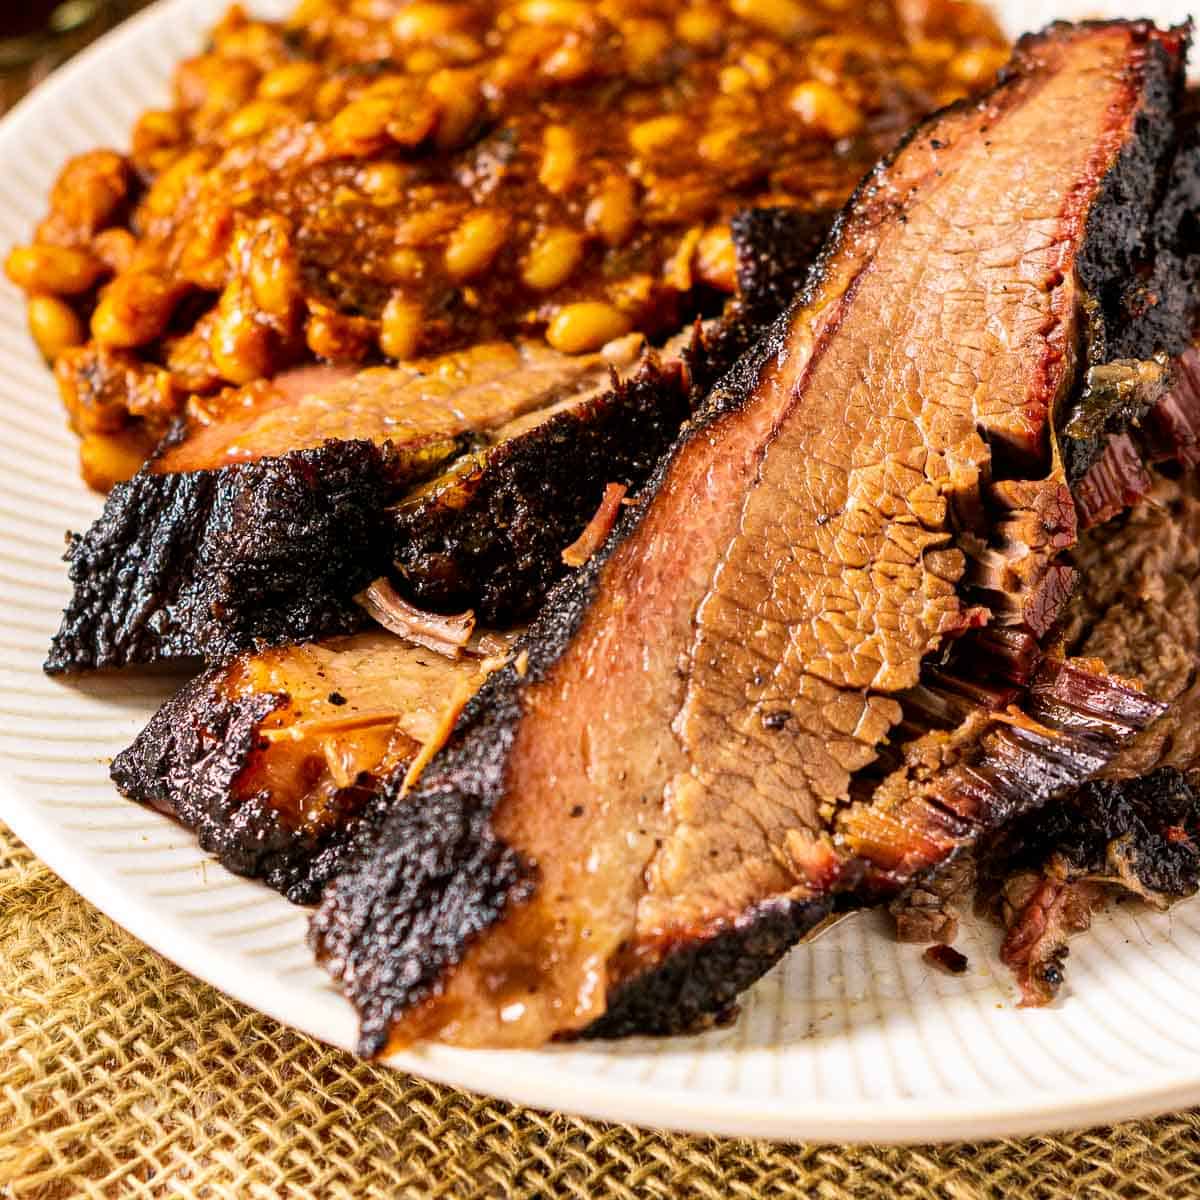 A close-up of the pellet grill brisket on a white plate with baked beans next to it.